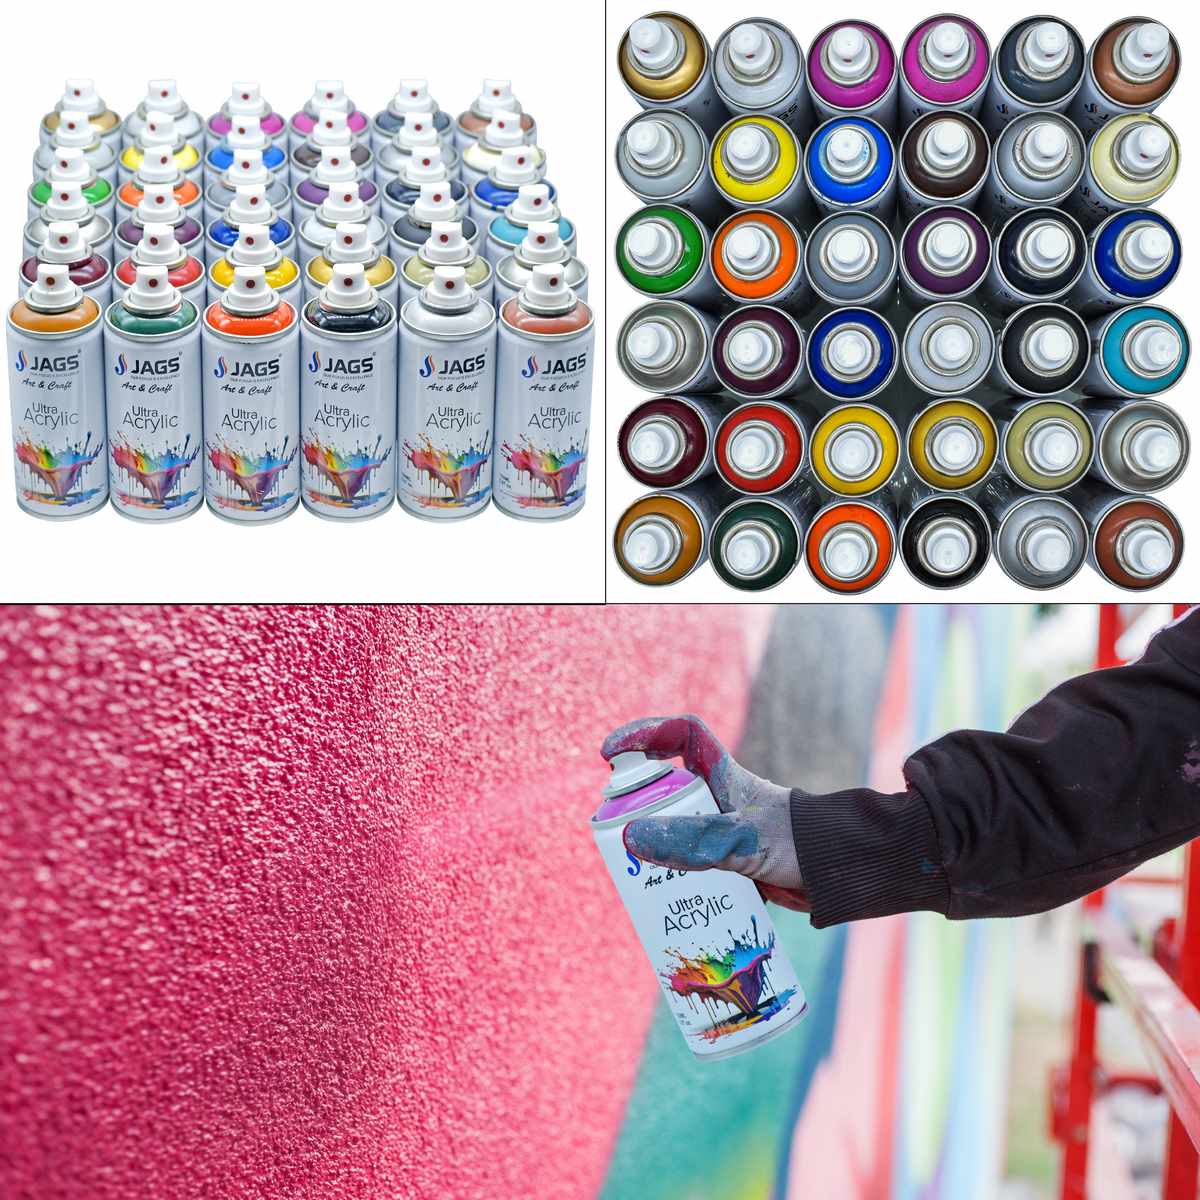 jags-mumbai Paint & Colours Jags Spray Ultra Acrylic 150ml Turquoise blue: Precision and Performance in Every Spray